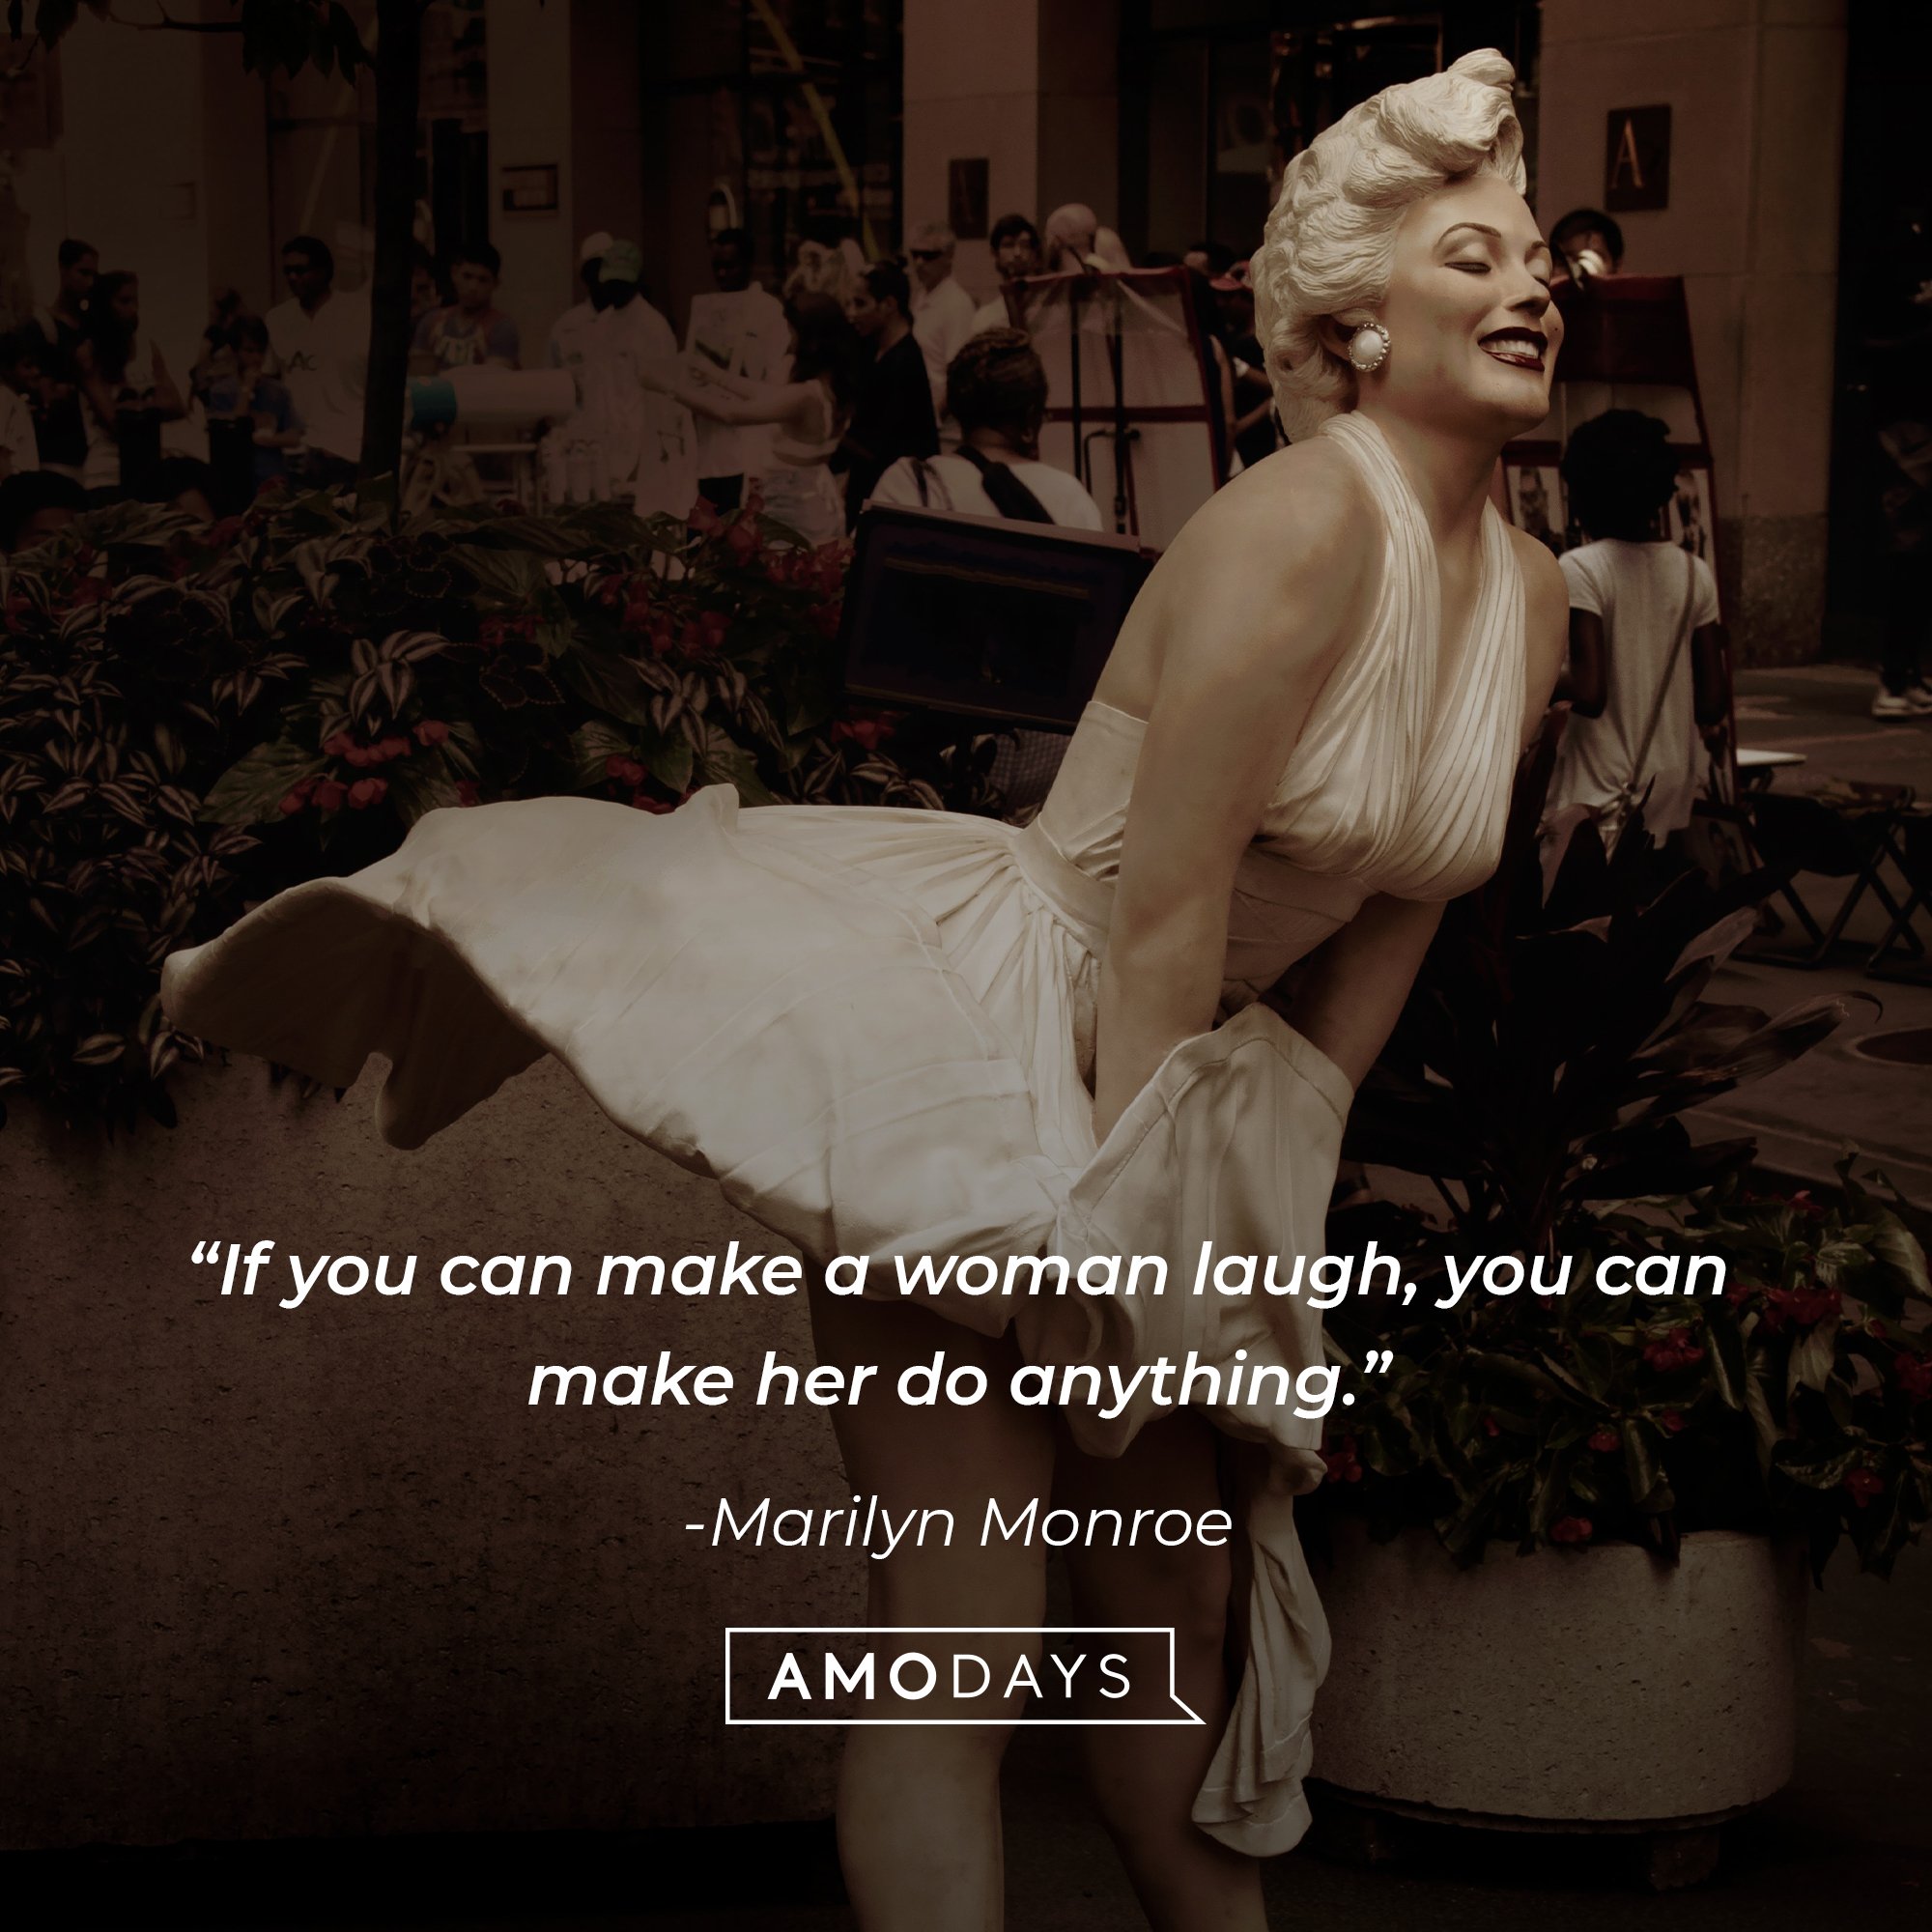 Marilyn Monroe’s quote: “If you can make a woman laugh, you can make her do anything.” | Image: AmoDays